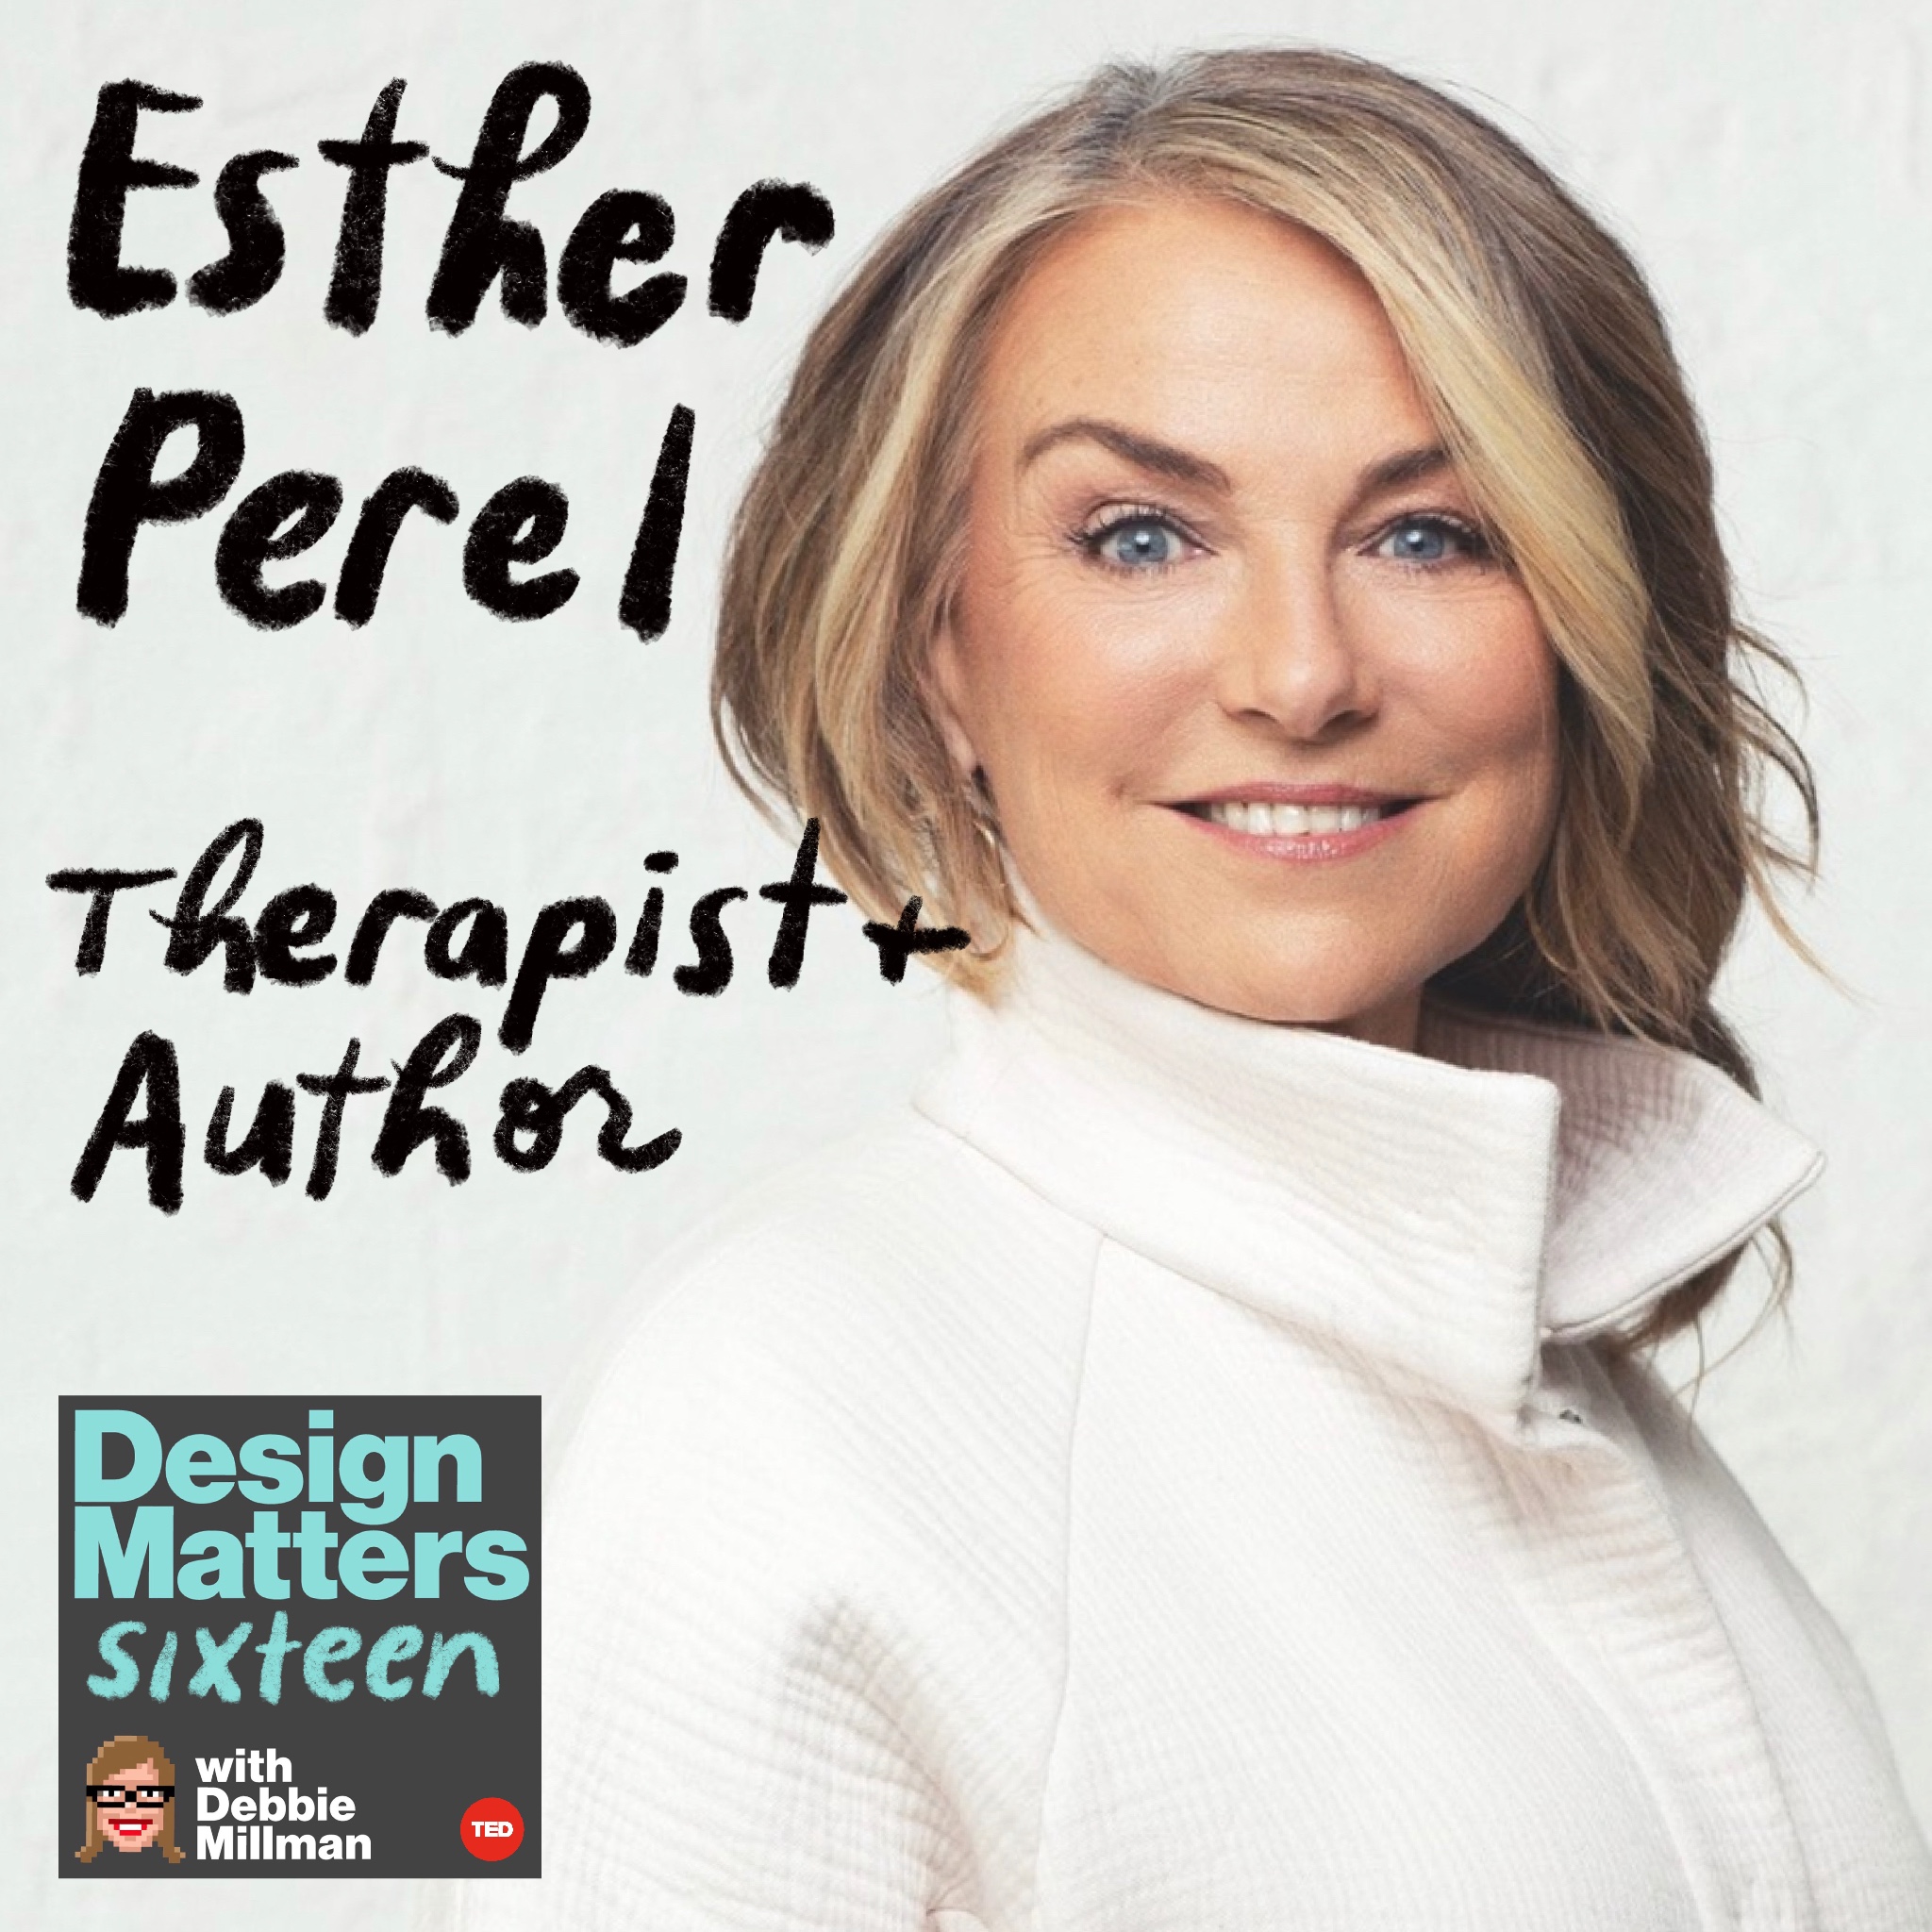 Design Matters From the Archive: Esther Perel